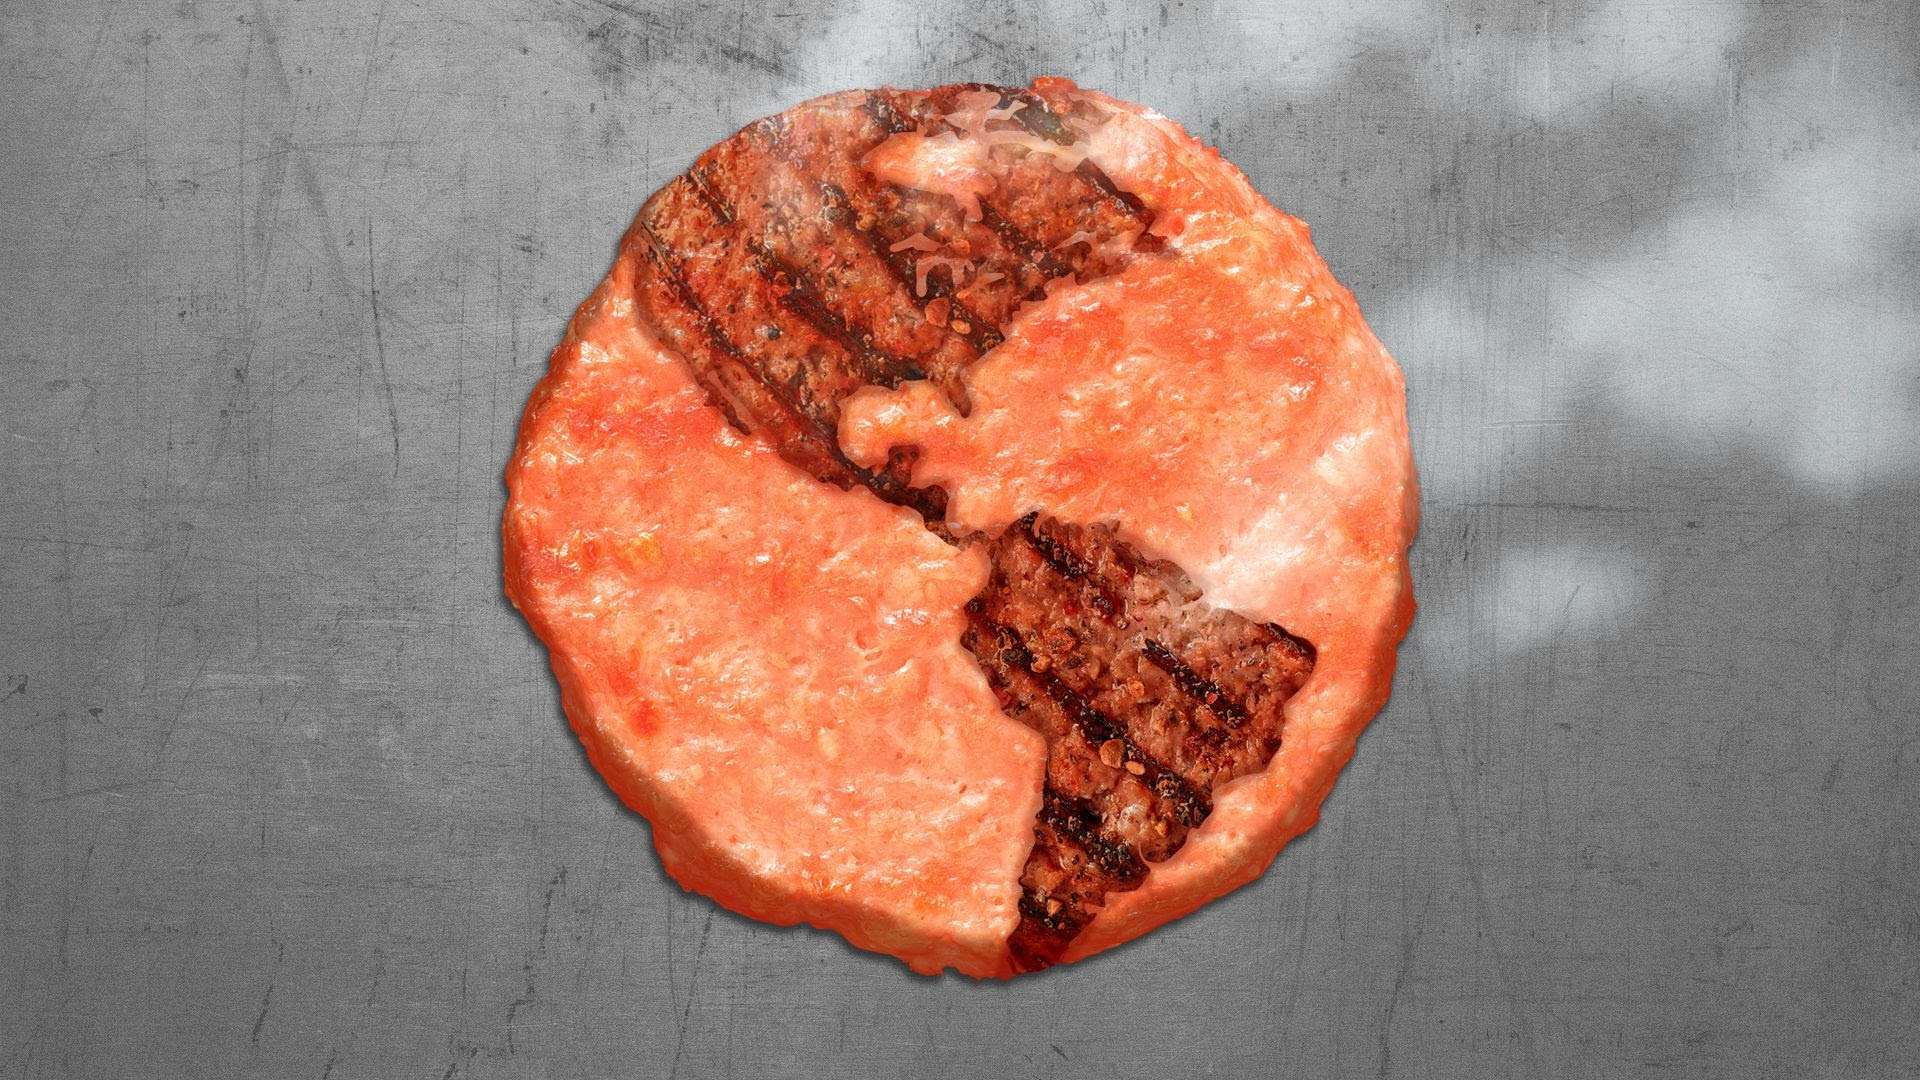 Illustration of a burger patty on a flat top grill with grill marks in the shape of the Western hemisphere